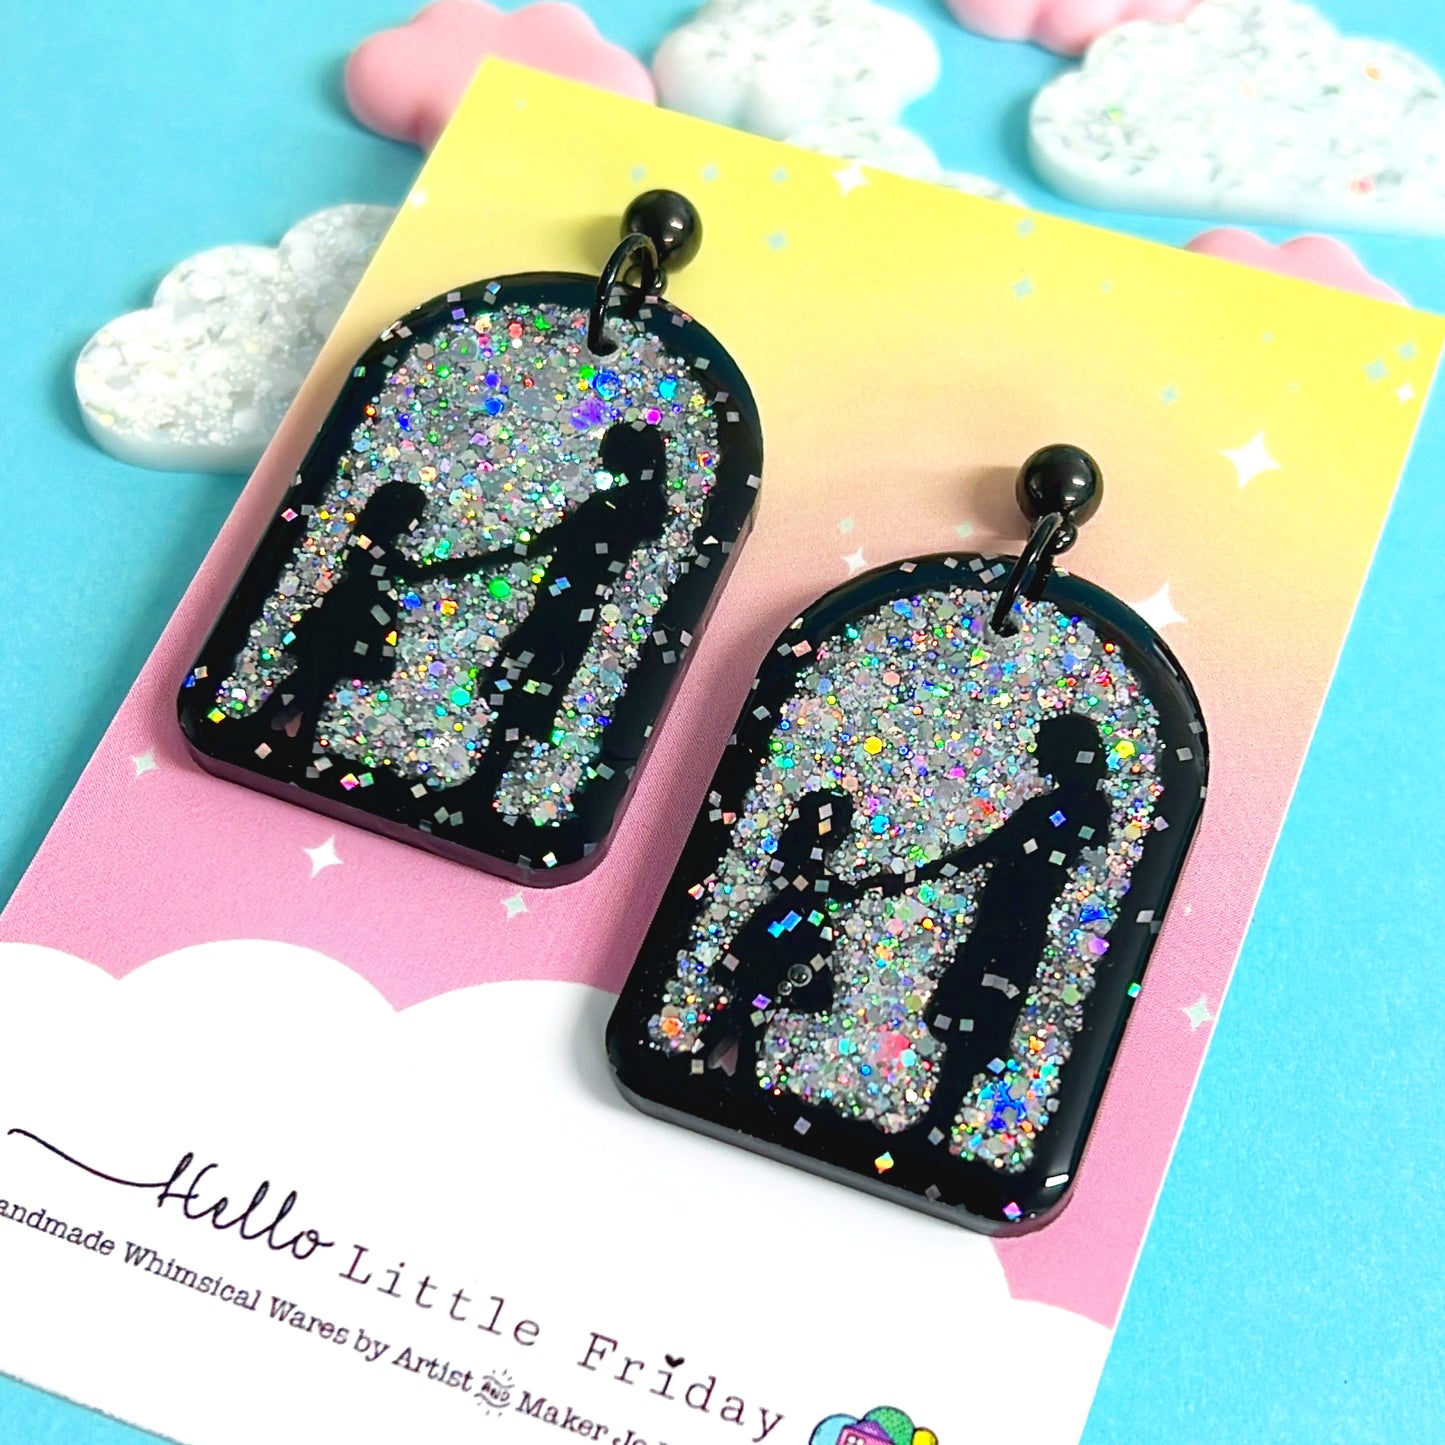 THE BEST FRIENDS COLLECTION : Choose your design : Handmade Holographic Resin DROP Earrings